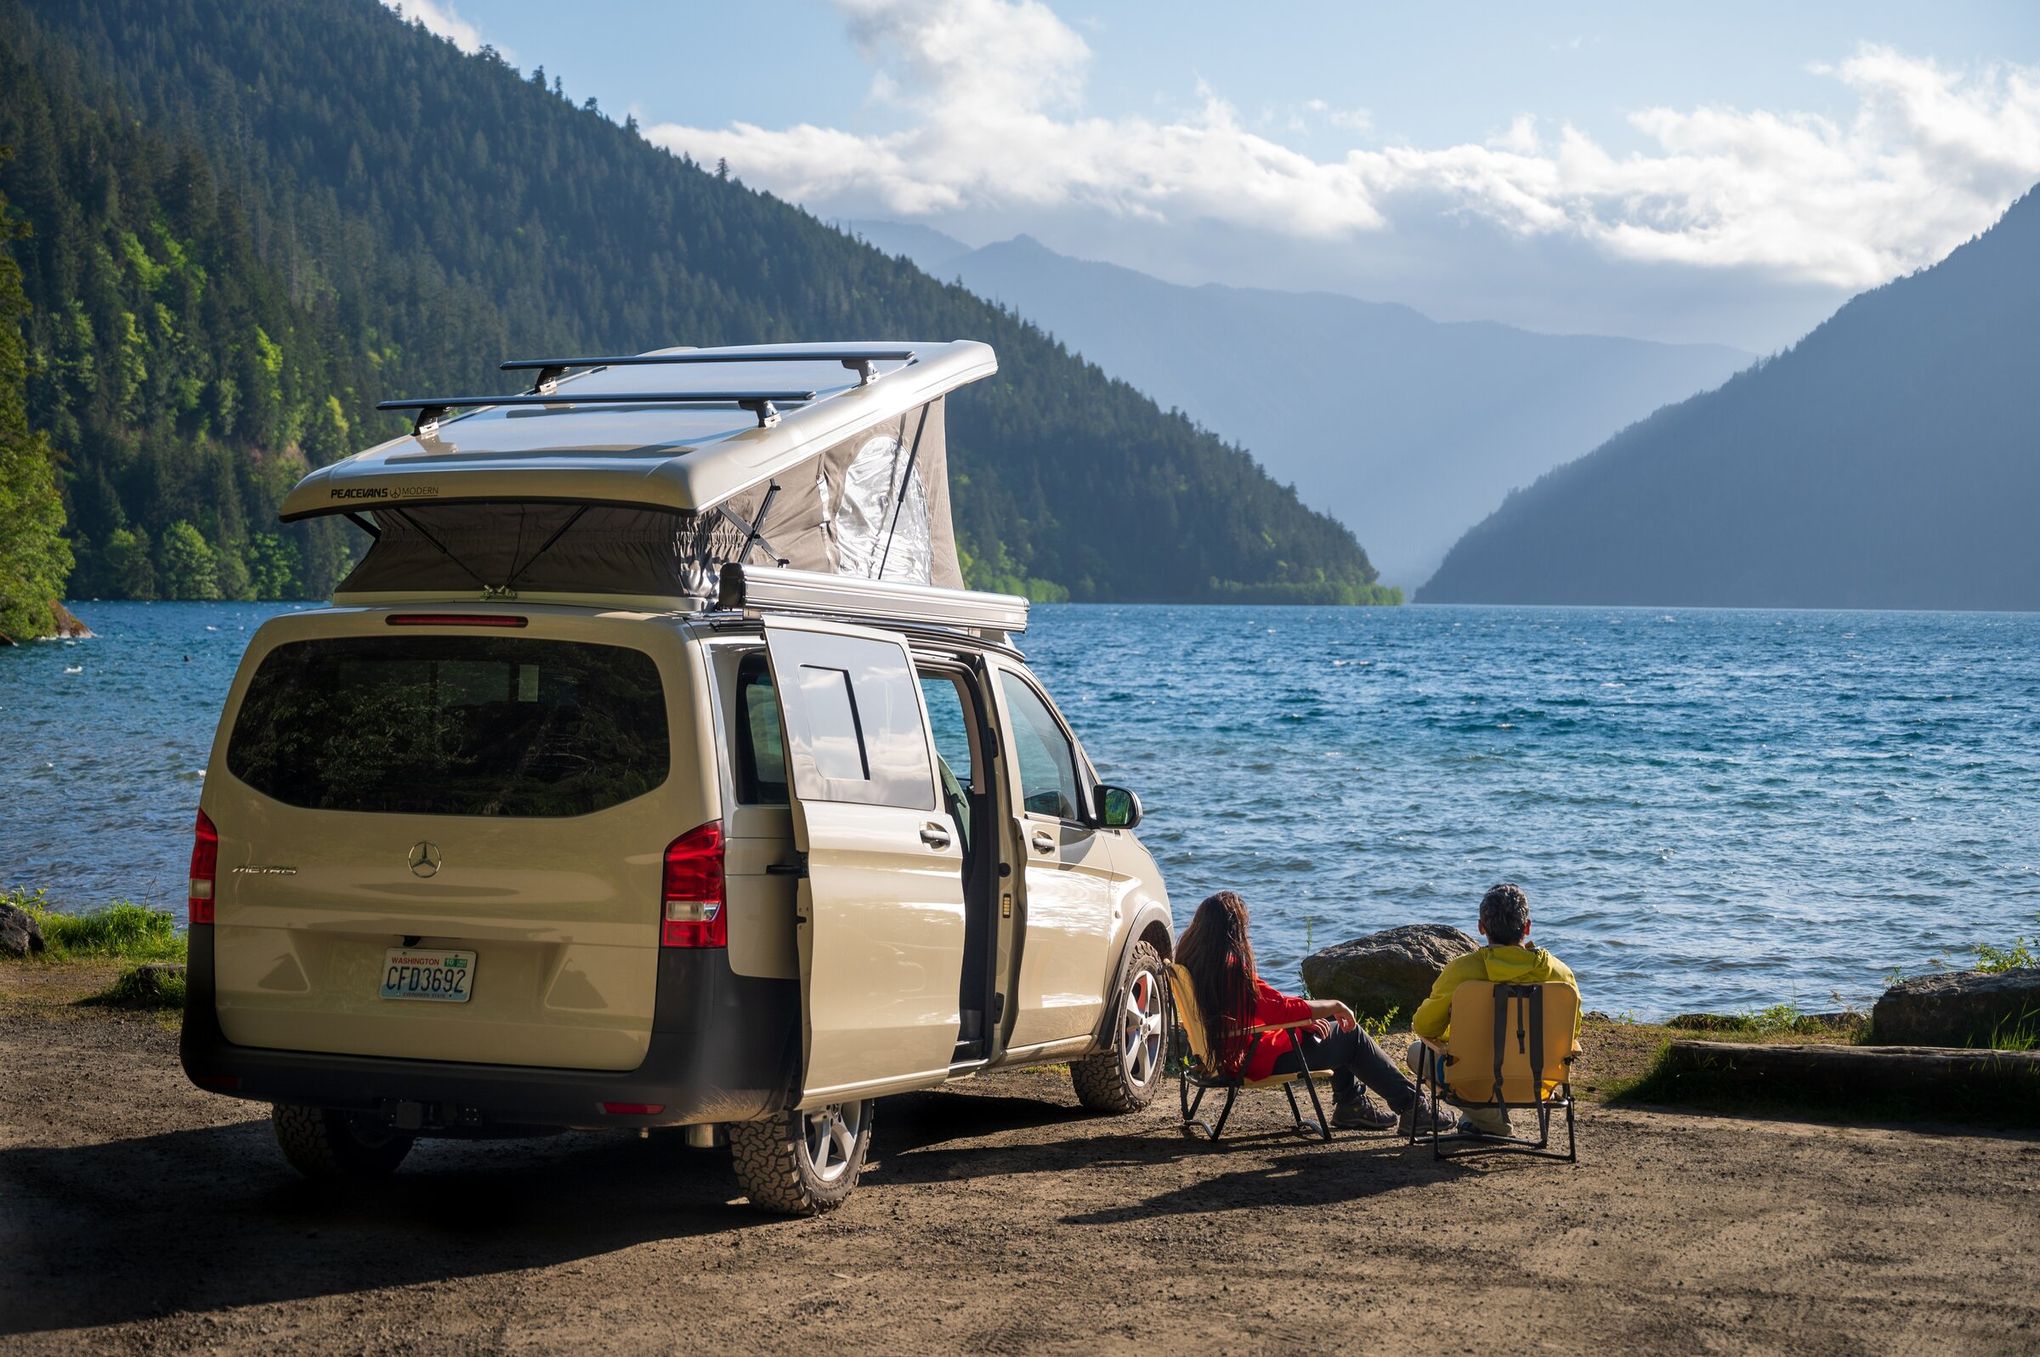 Van Life Company Launches in West Michigan to Build Ultimate Camper Vans